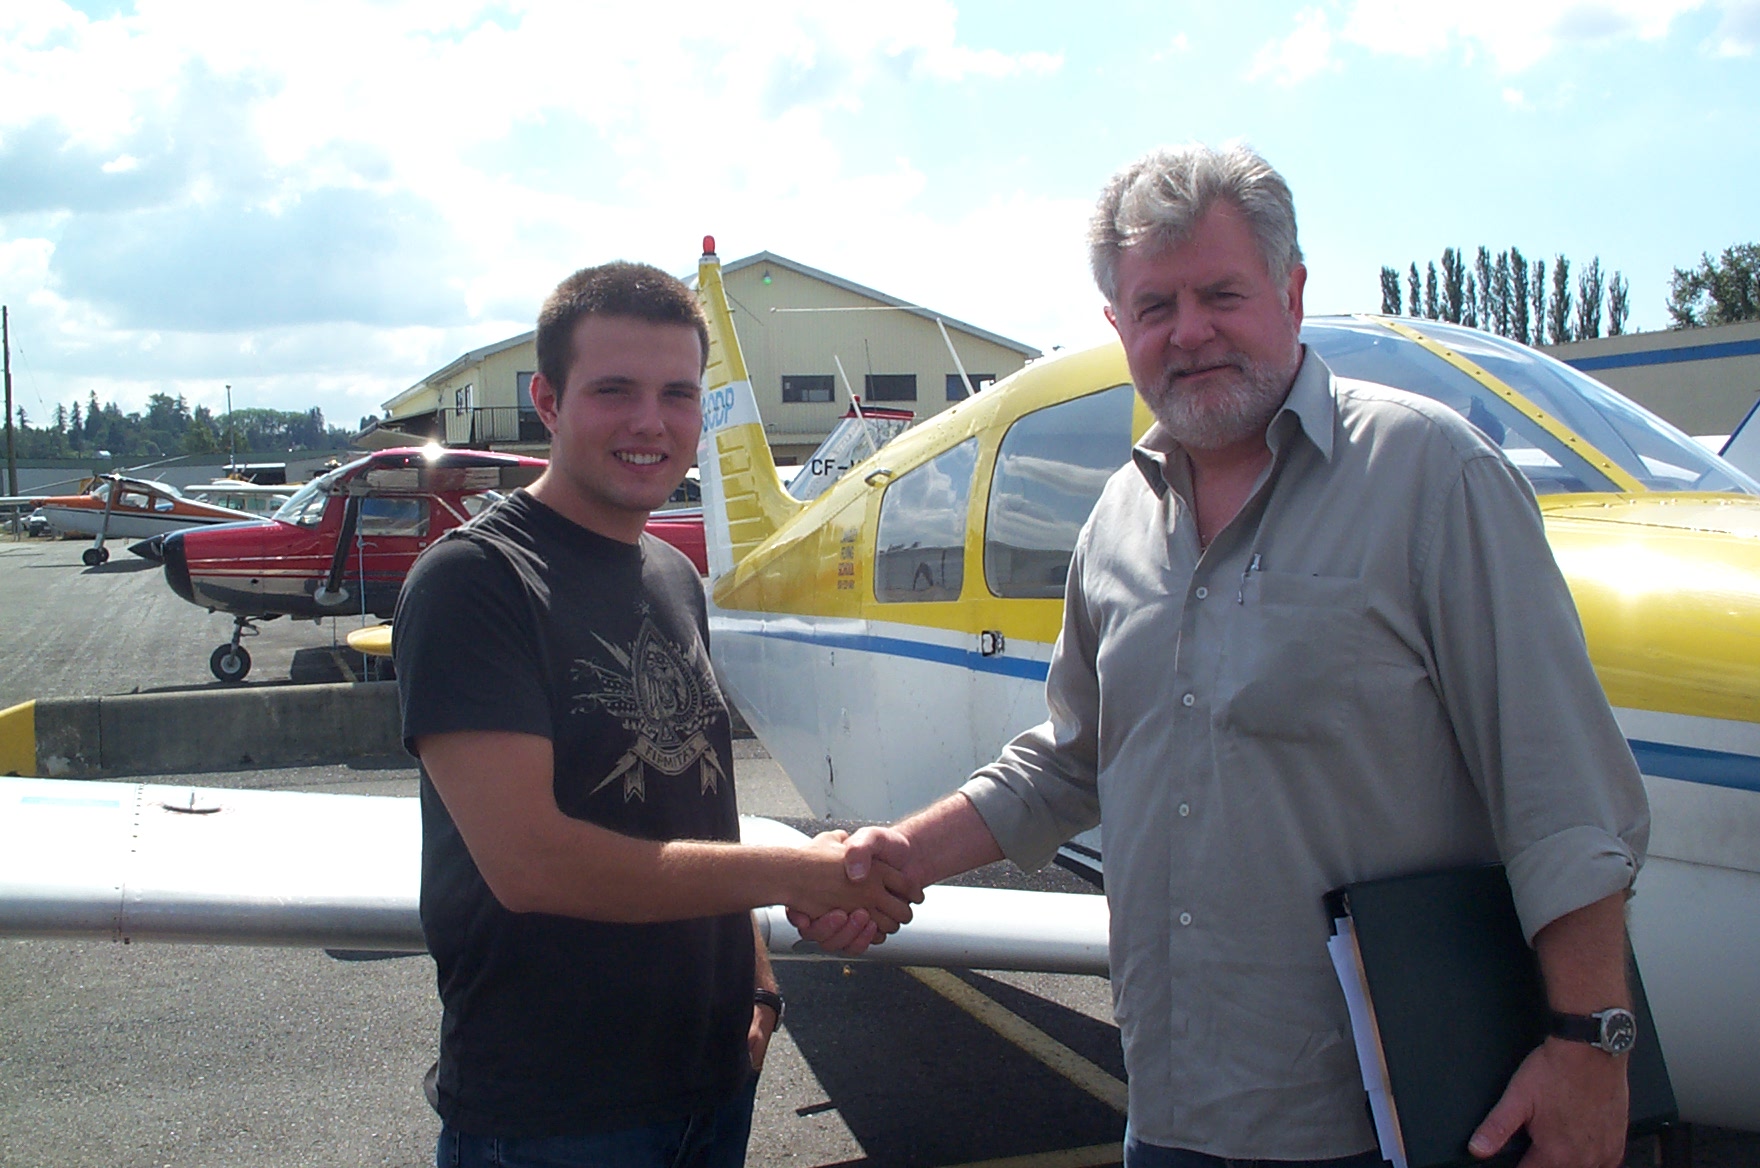 Ryan Fielding receives congrats from his Pilot Examiner Paul Harris after the successful completion of Ryan's Private Pilot Flight Test on August 30, 2010. Congratulations also to Ryan's Flight Instructor, Rita Methorst.  Langley Flying School.